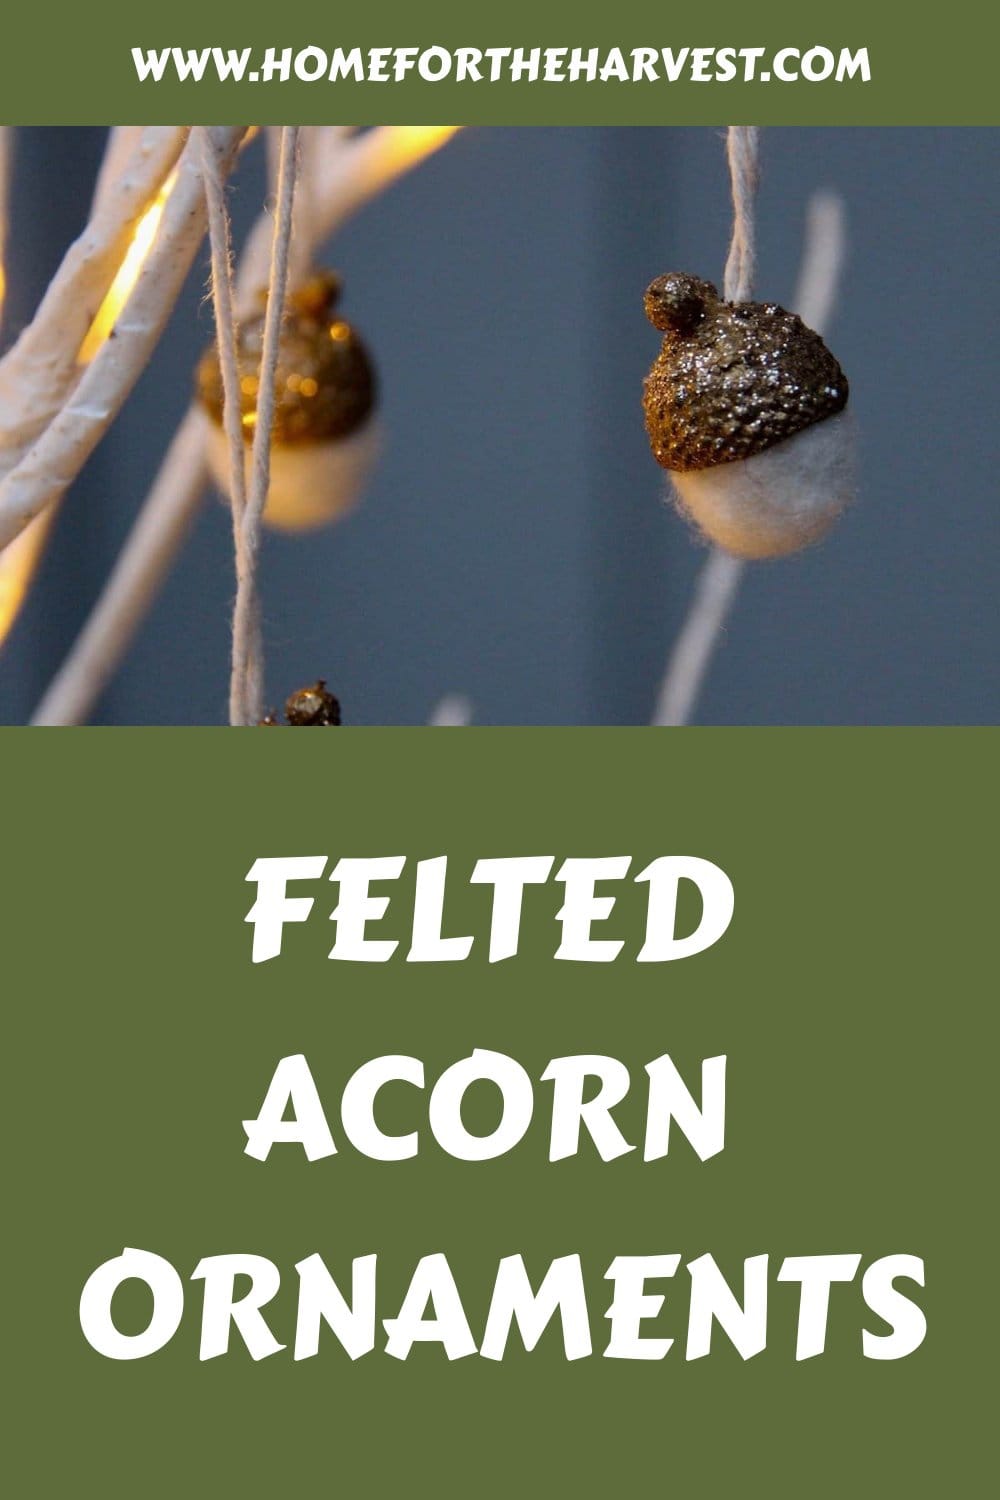 Felted acorn ornaments generated pin 3328